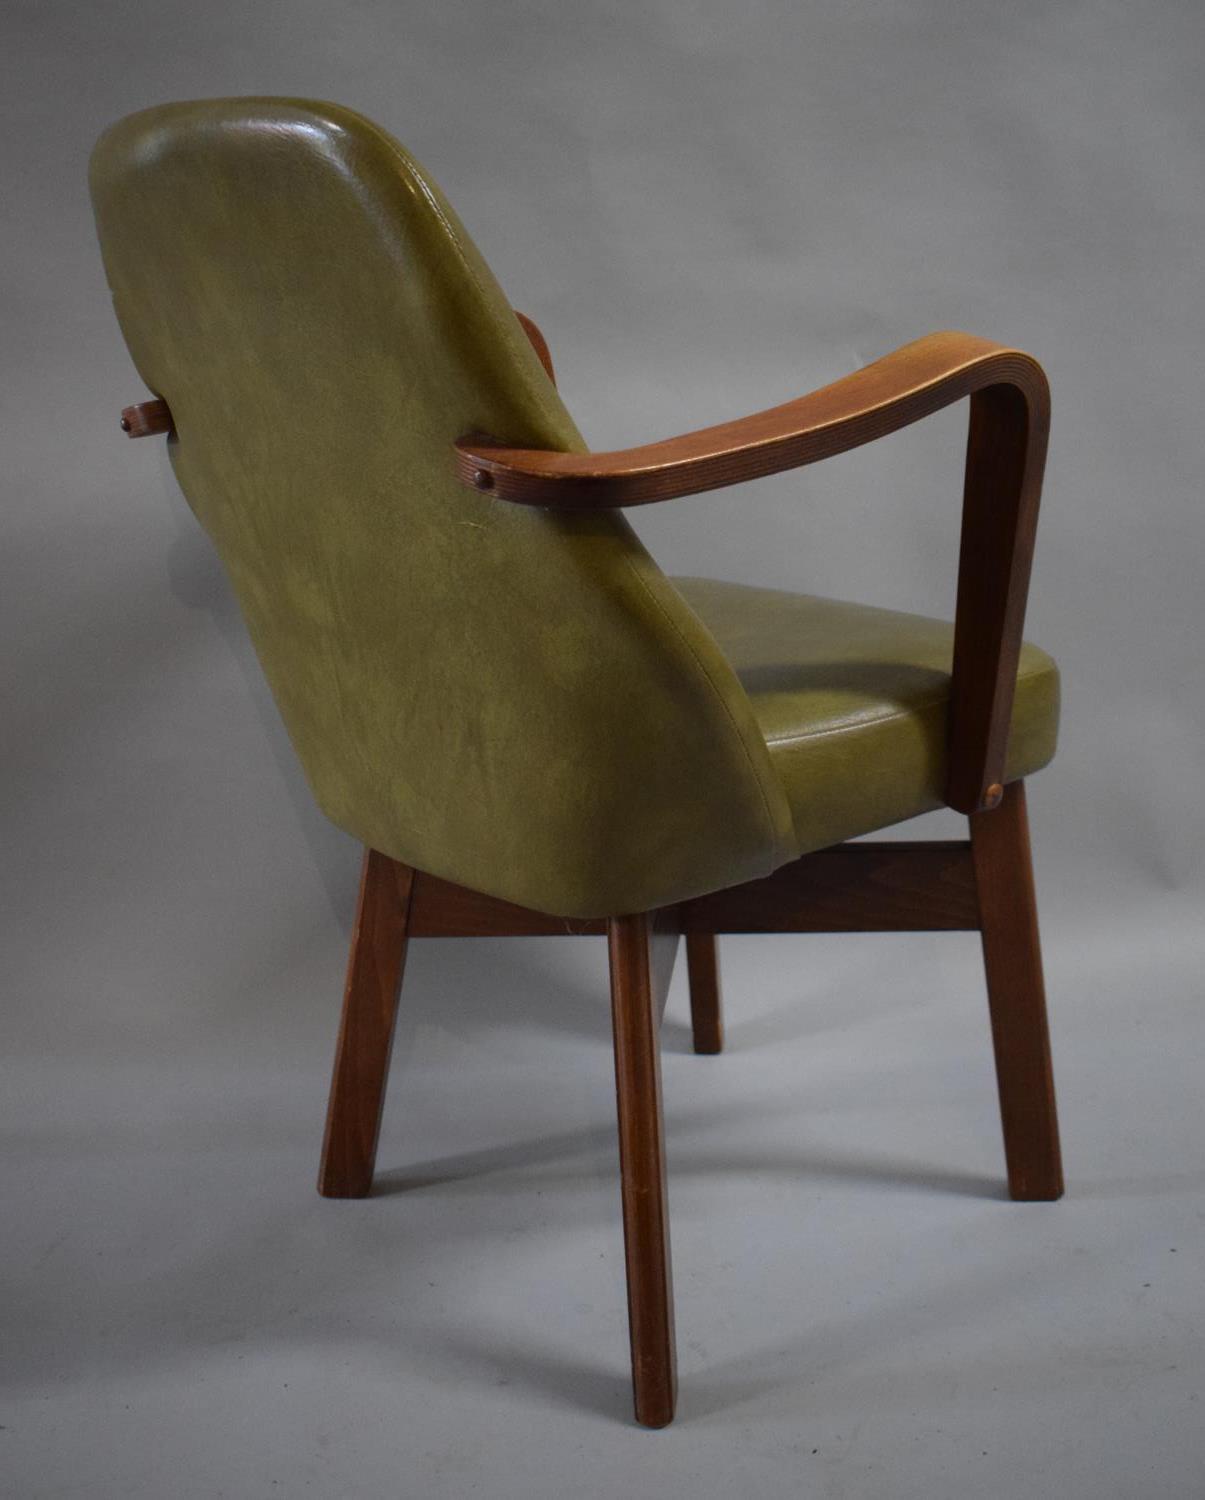 A Pair of Vintage Leather Effect Upholstered Open Armchairs - Image 4 of 4